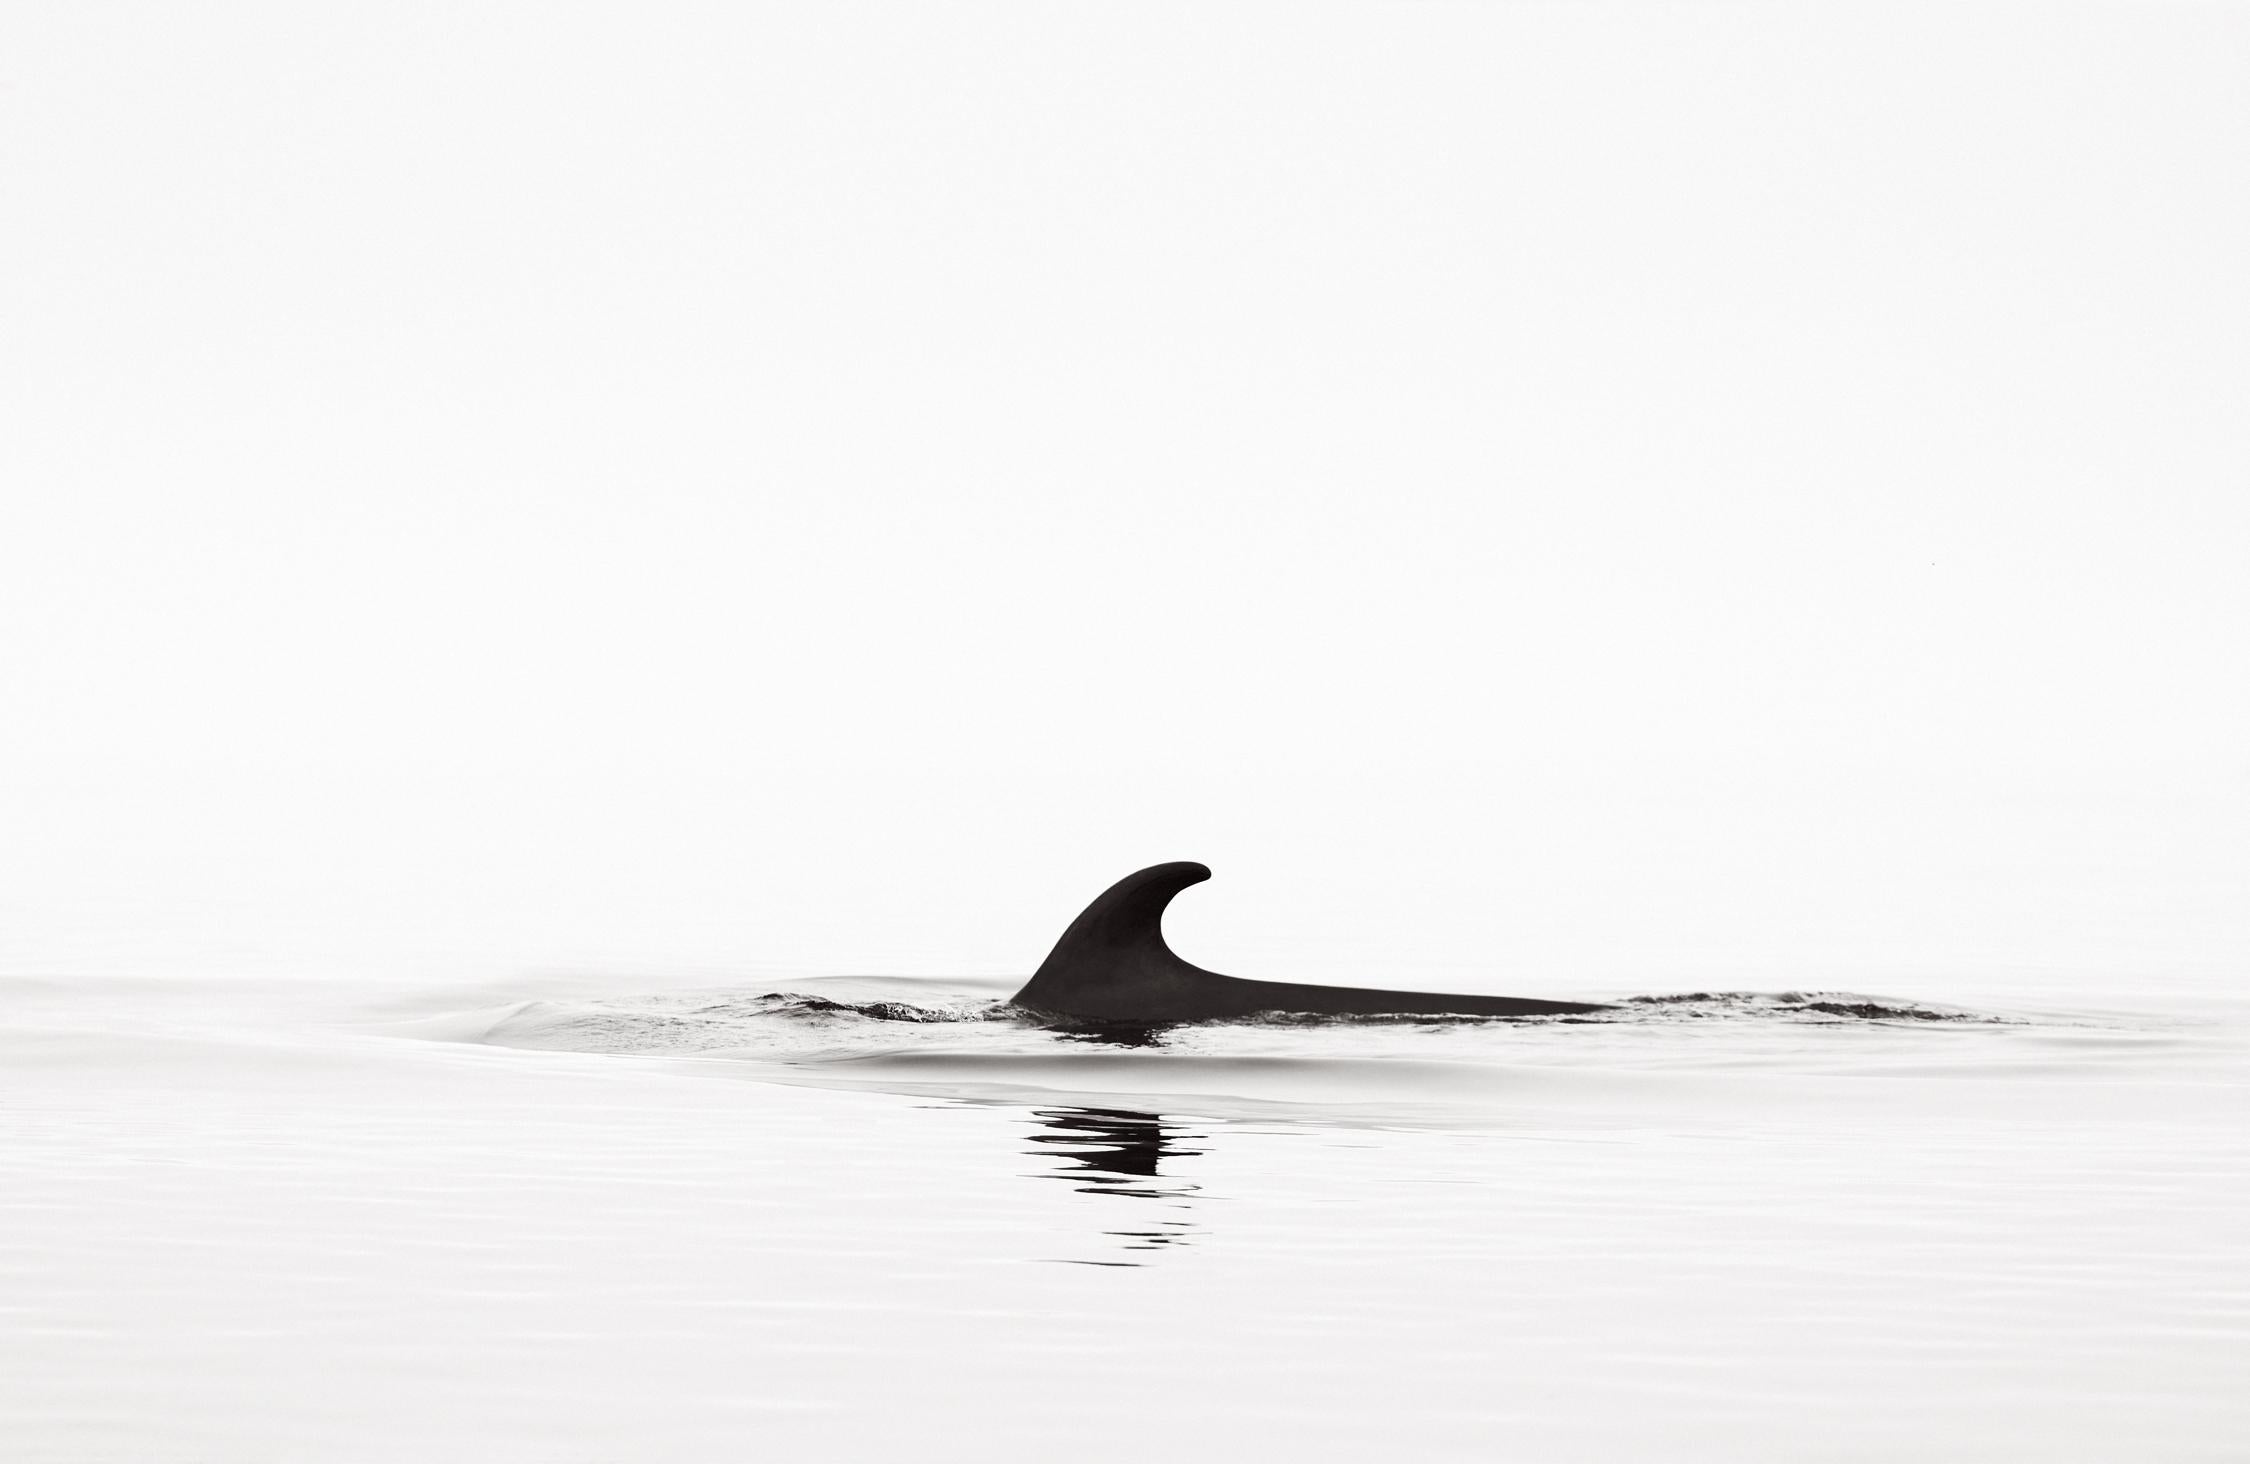 Drew Doggett Black and White Photograph - Minimal, Abstract Black & White Photography of a Whale Surfacing